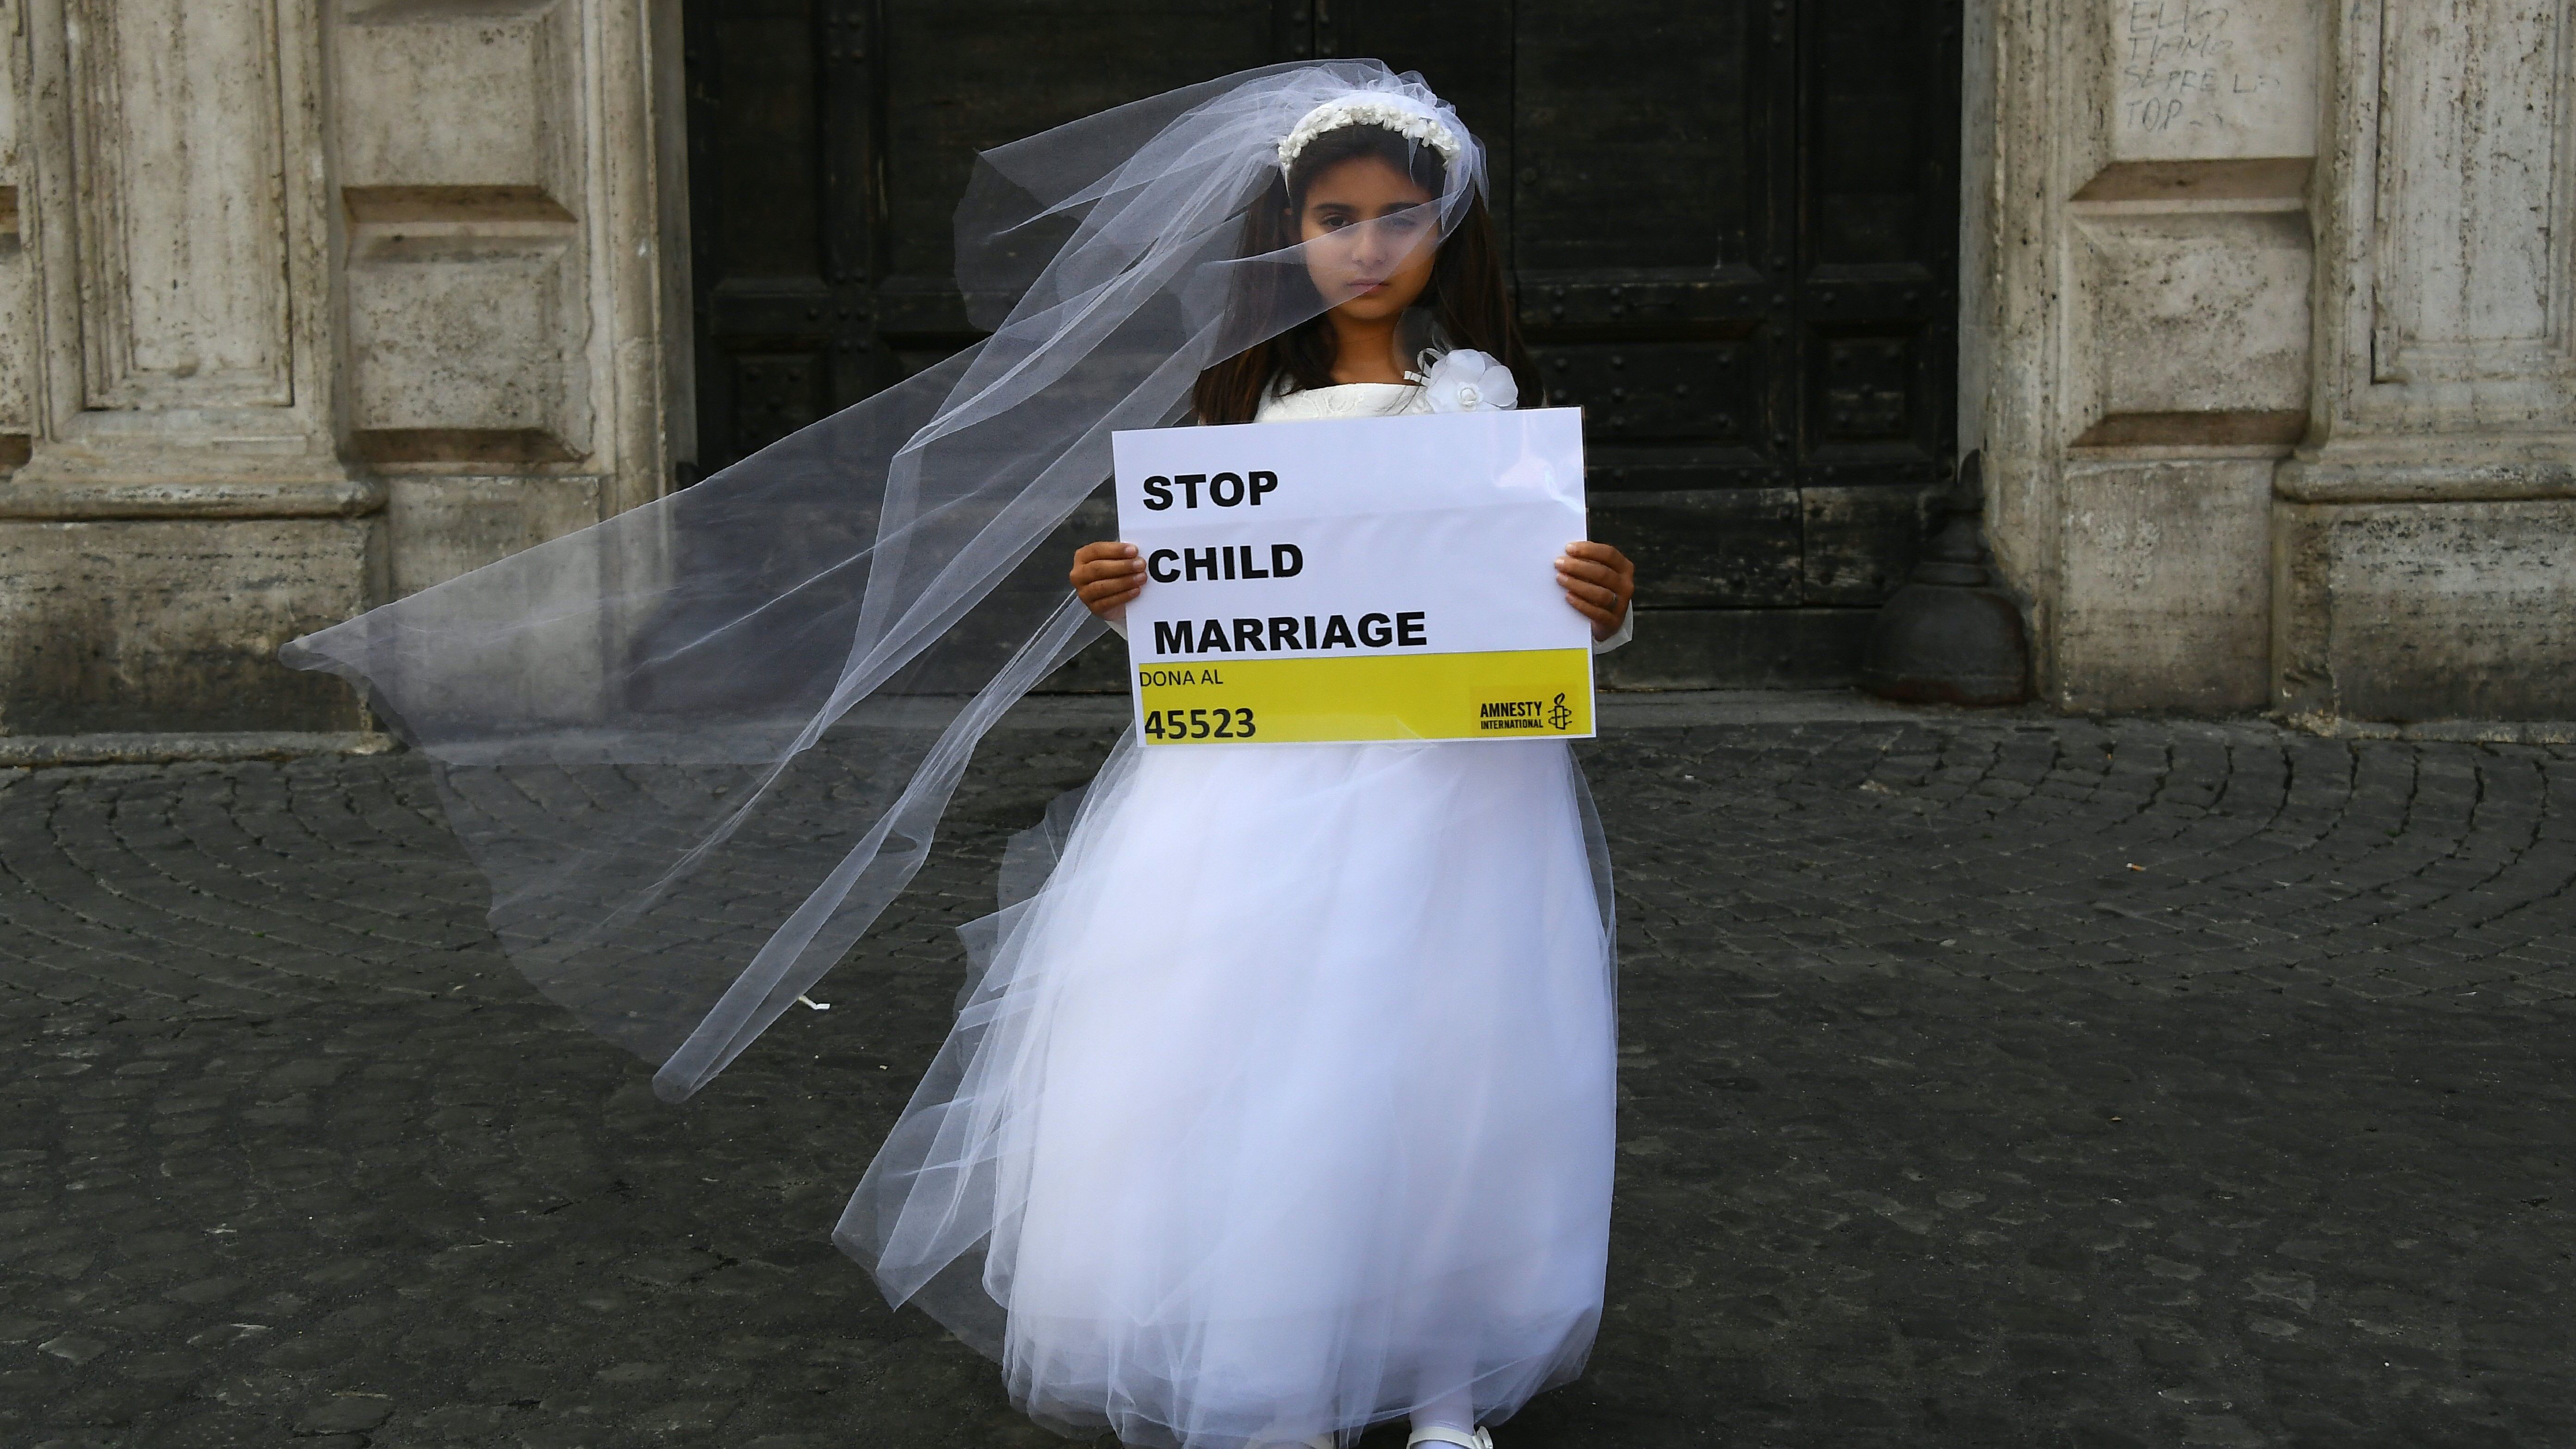 PA Outlaws Child Marriage